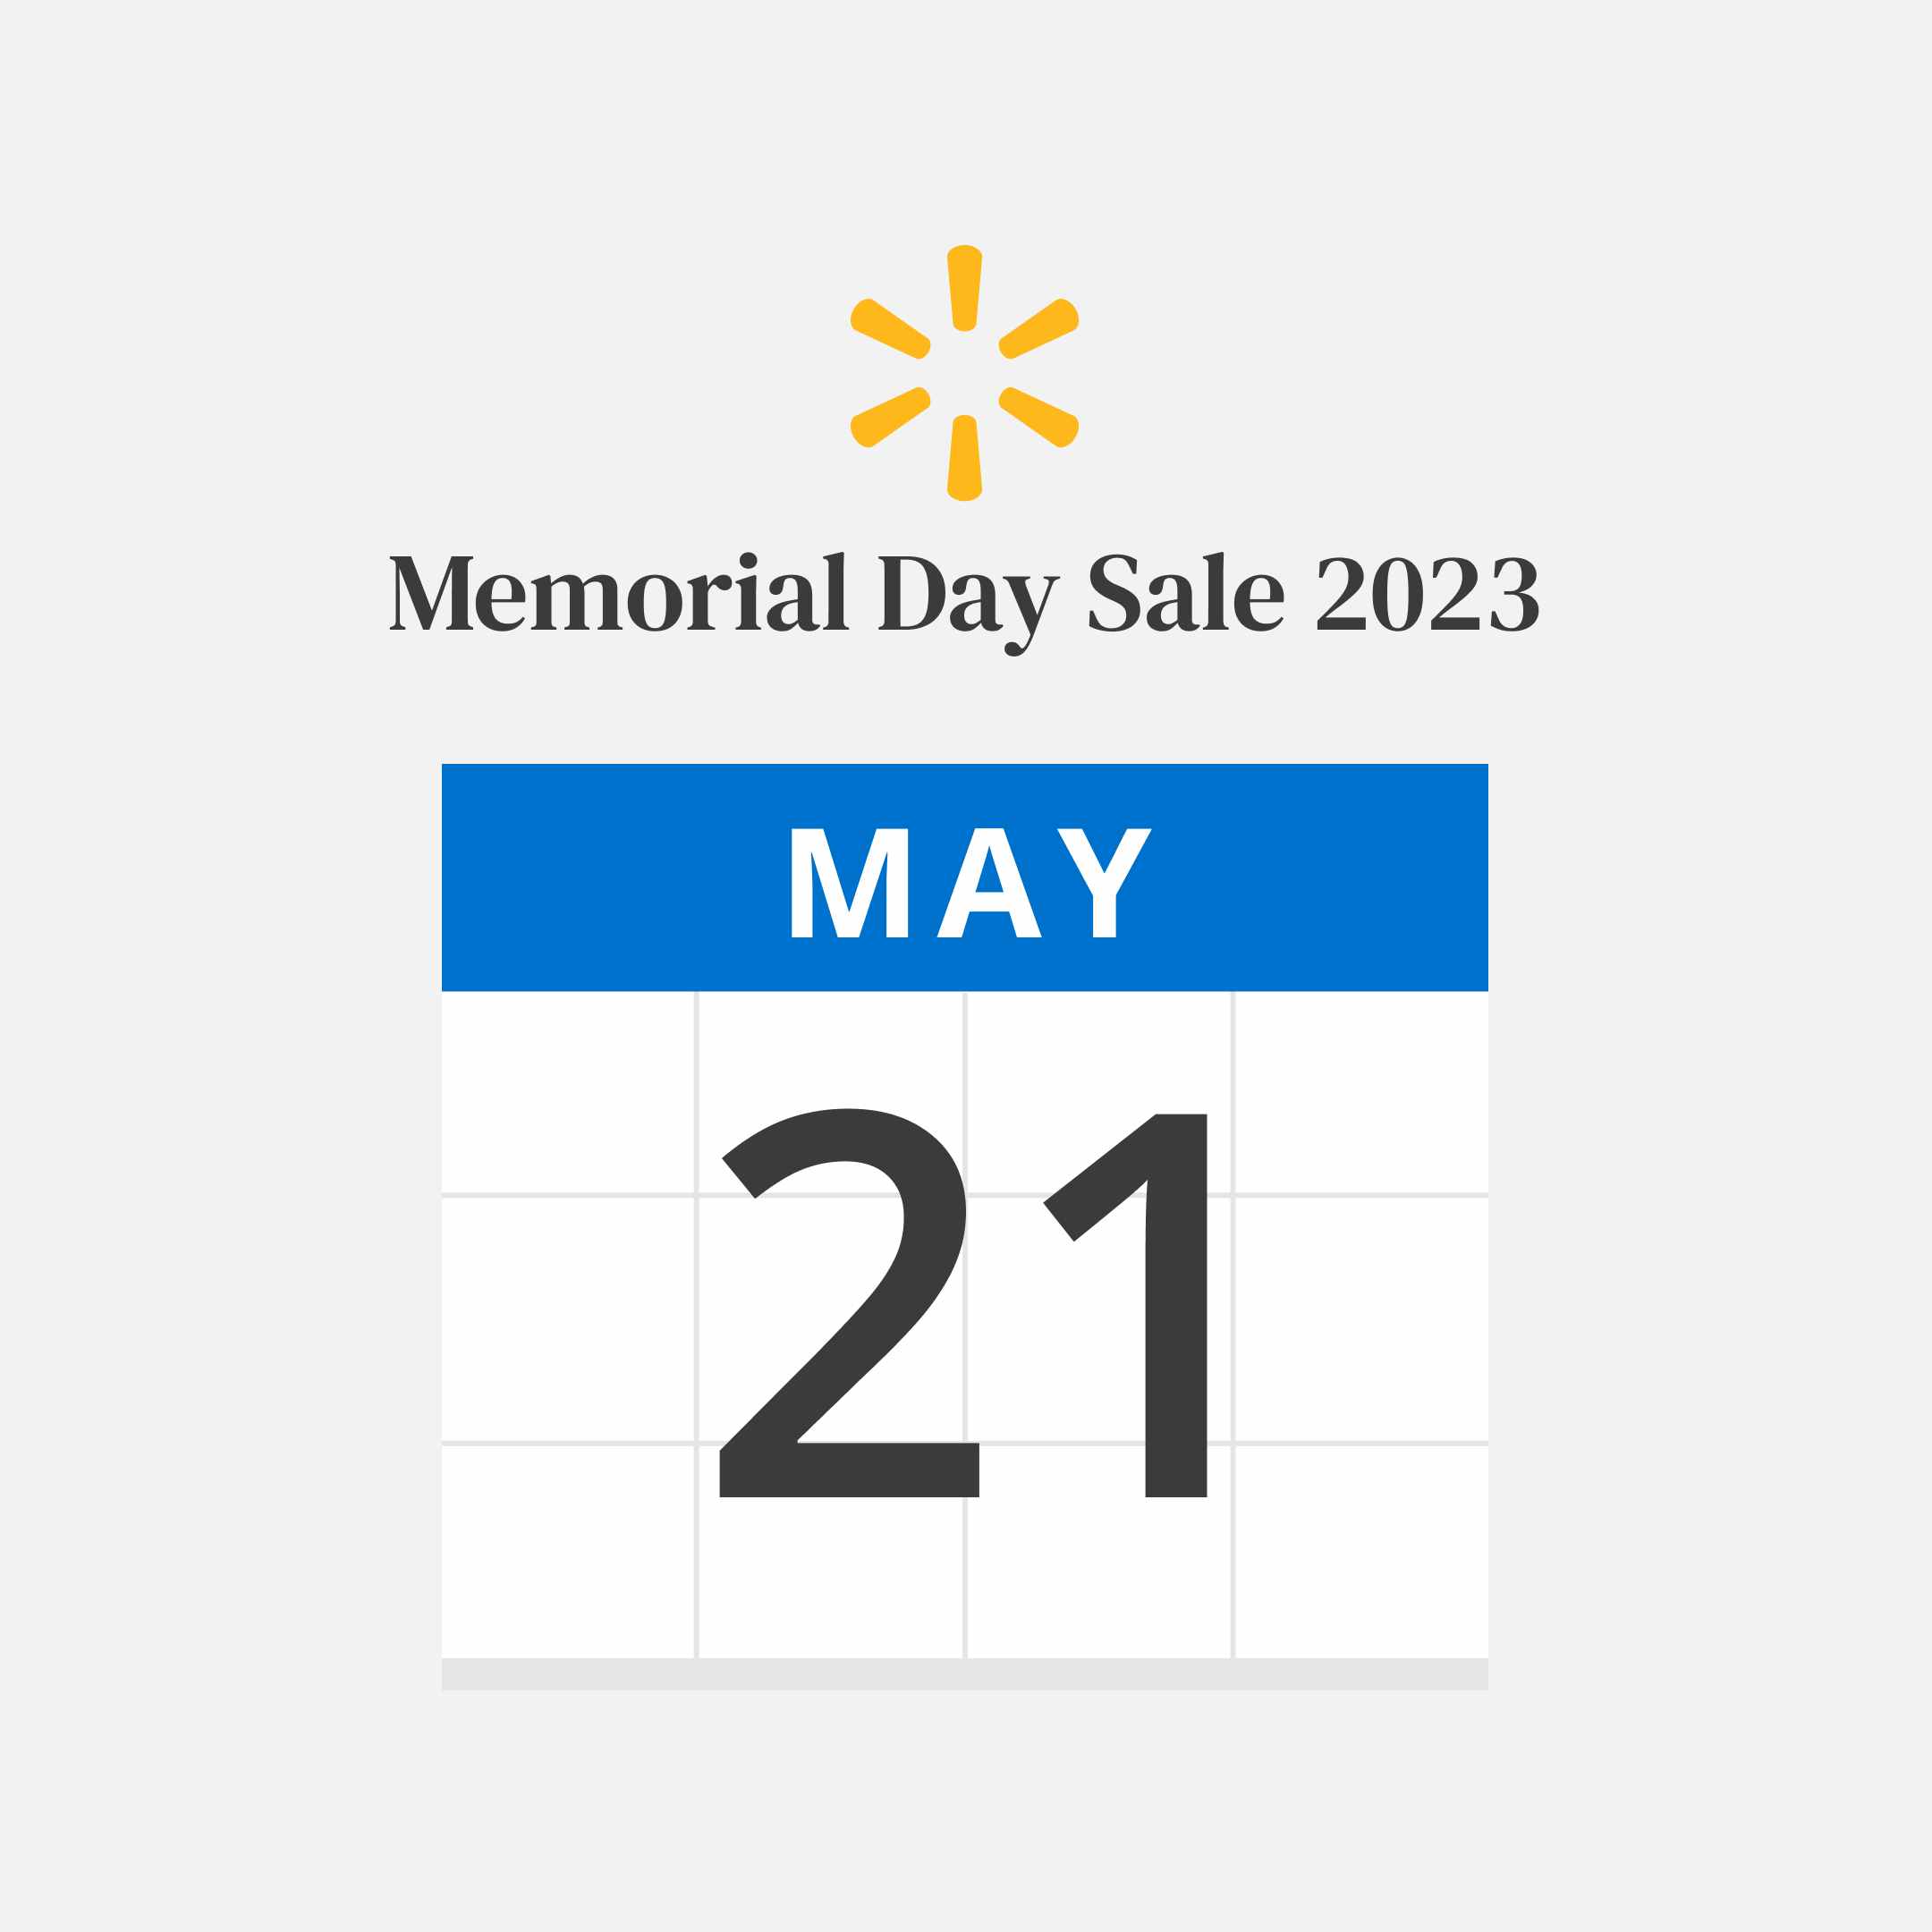 https://prod-cdn-thekrazycouponlady.imgix.net/wp-content/uploads/2023/05/walmart-memorial-day-sale-soc-1-1684780383-1684780383.png?auto=format&fit=fill&q=25